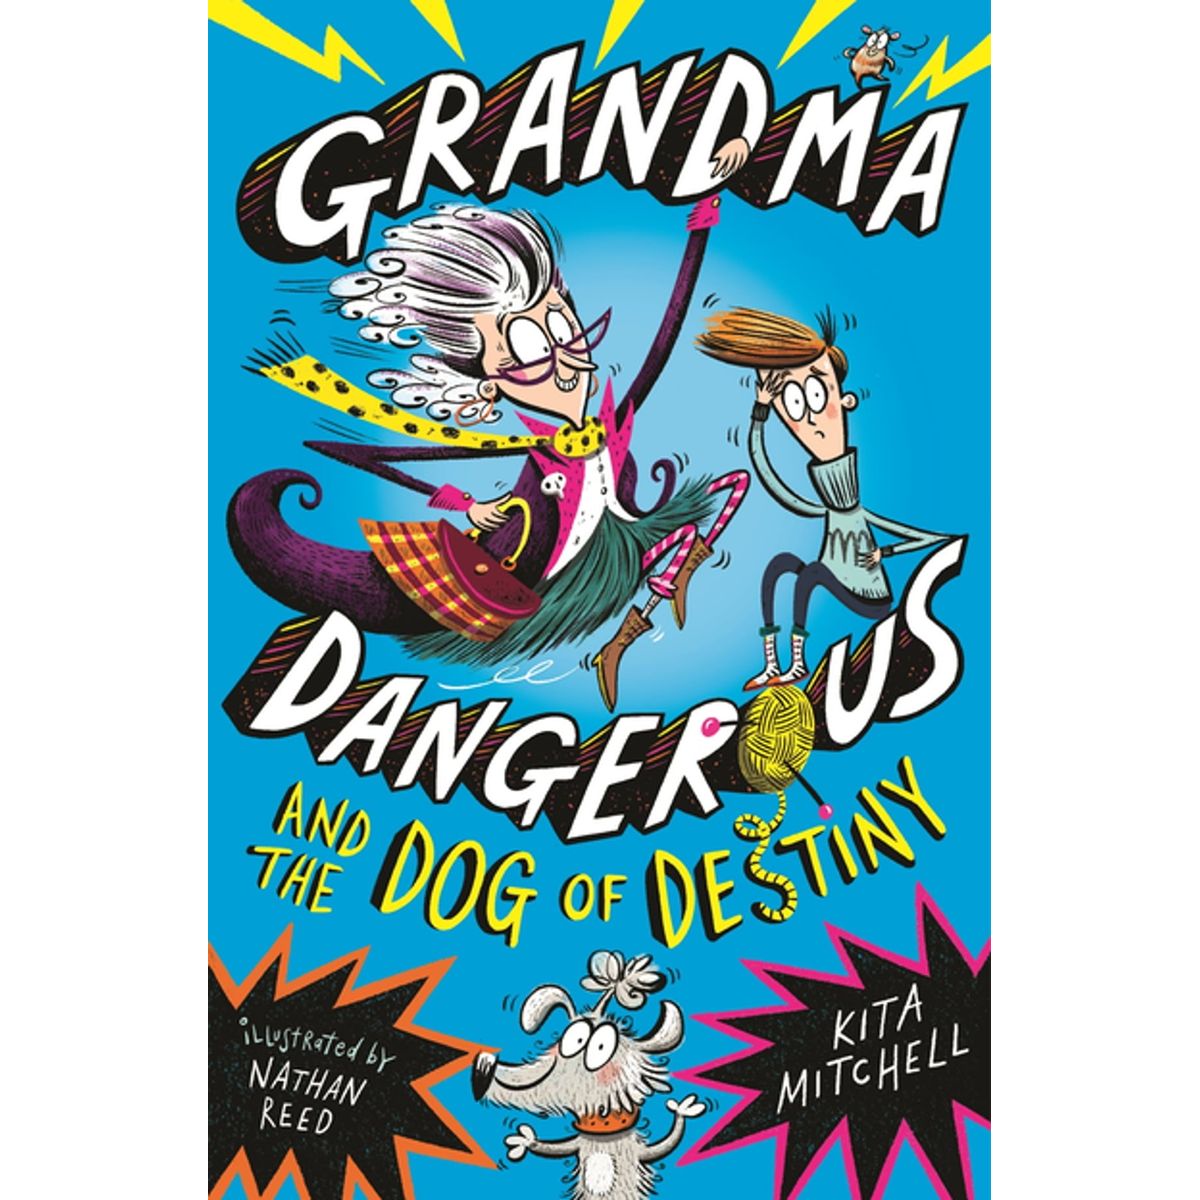 ISBN: 9781408355060 / 140835506X - Grandma Dangerous and the Dog of Destiny by Kita Mitchell, illustrated by Nathan Reed [2018]